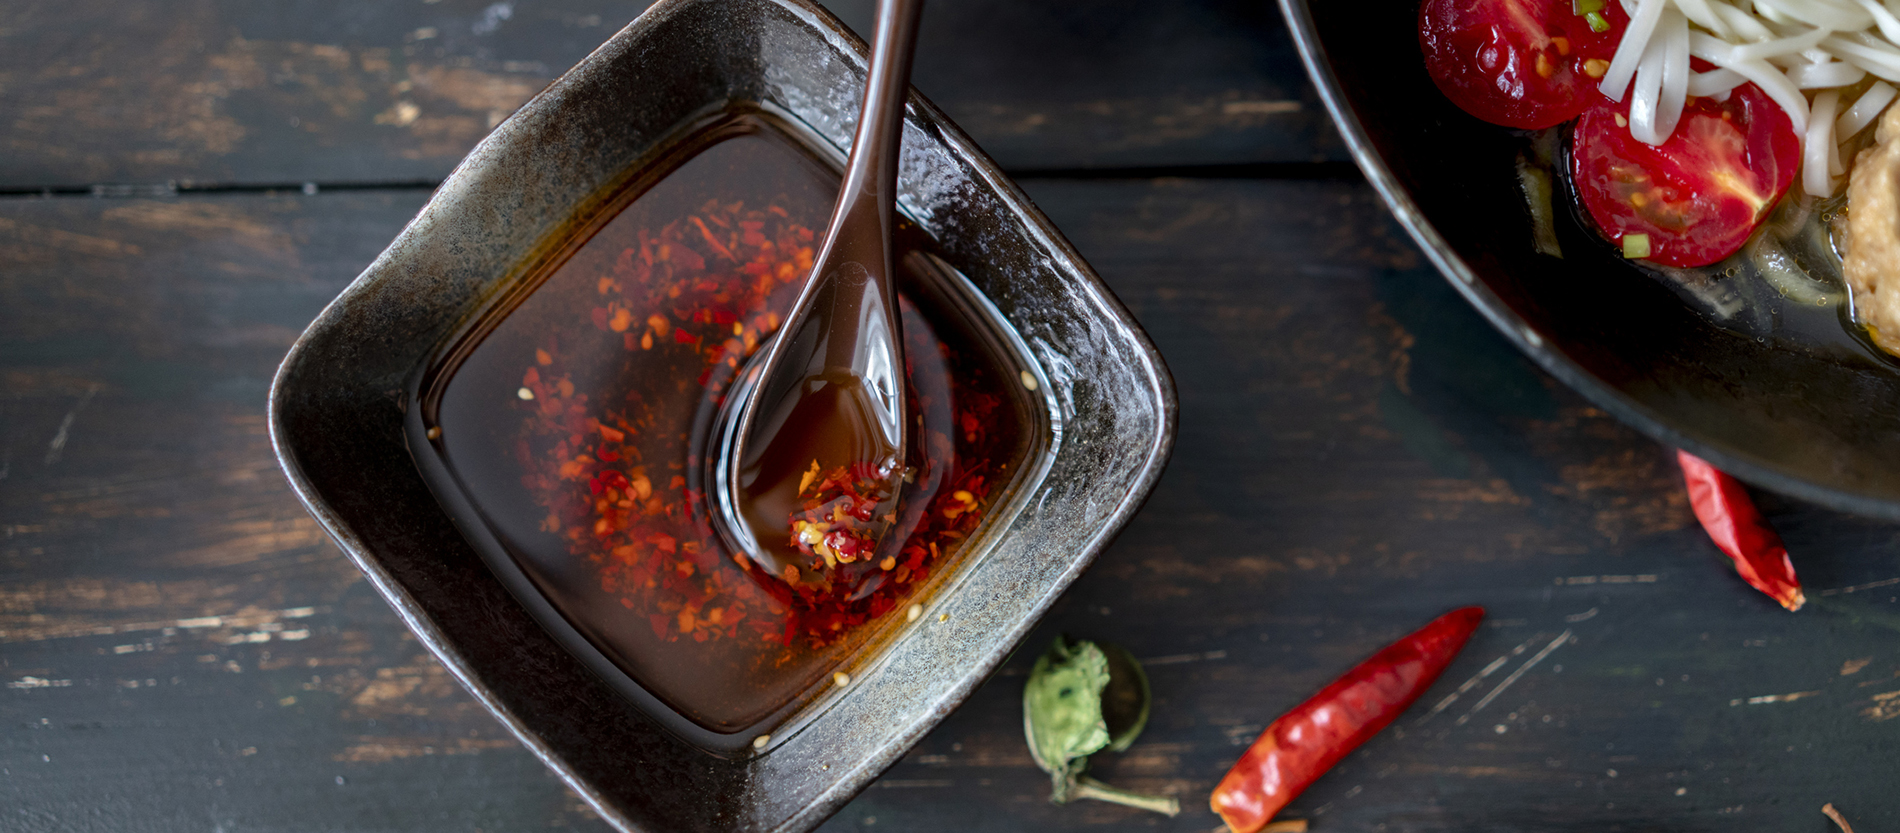 Add Chili Sauce to Spice Up Your Asian Stir Fry